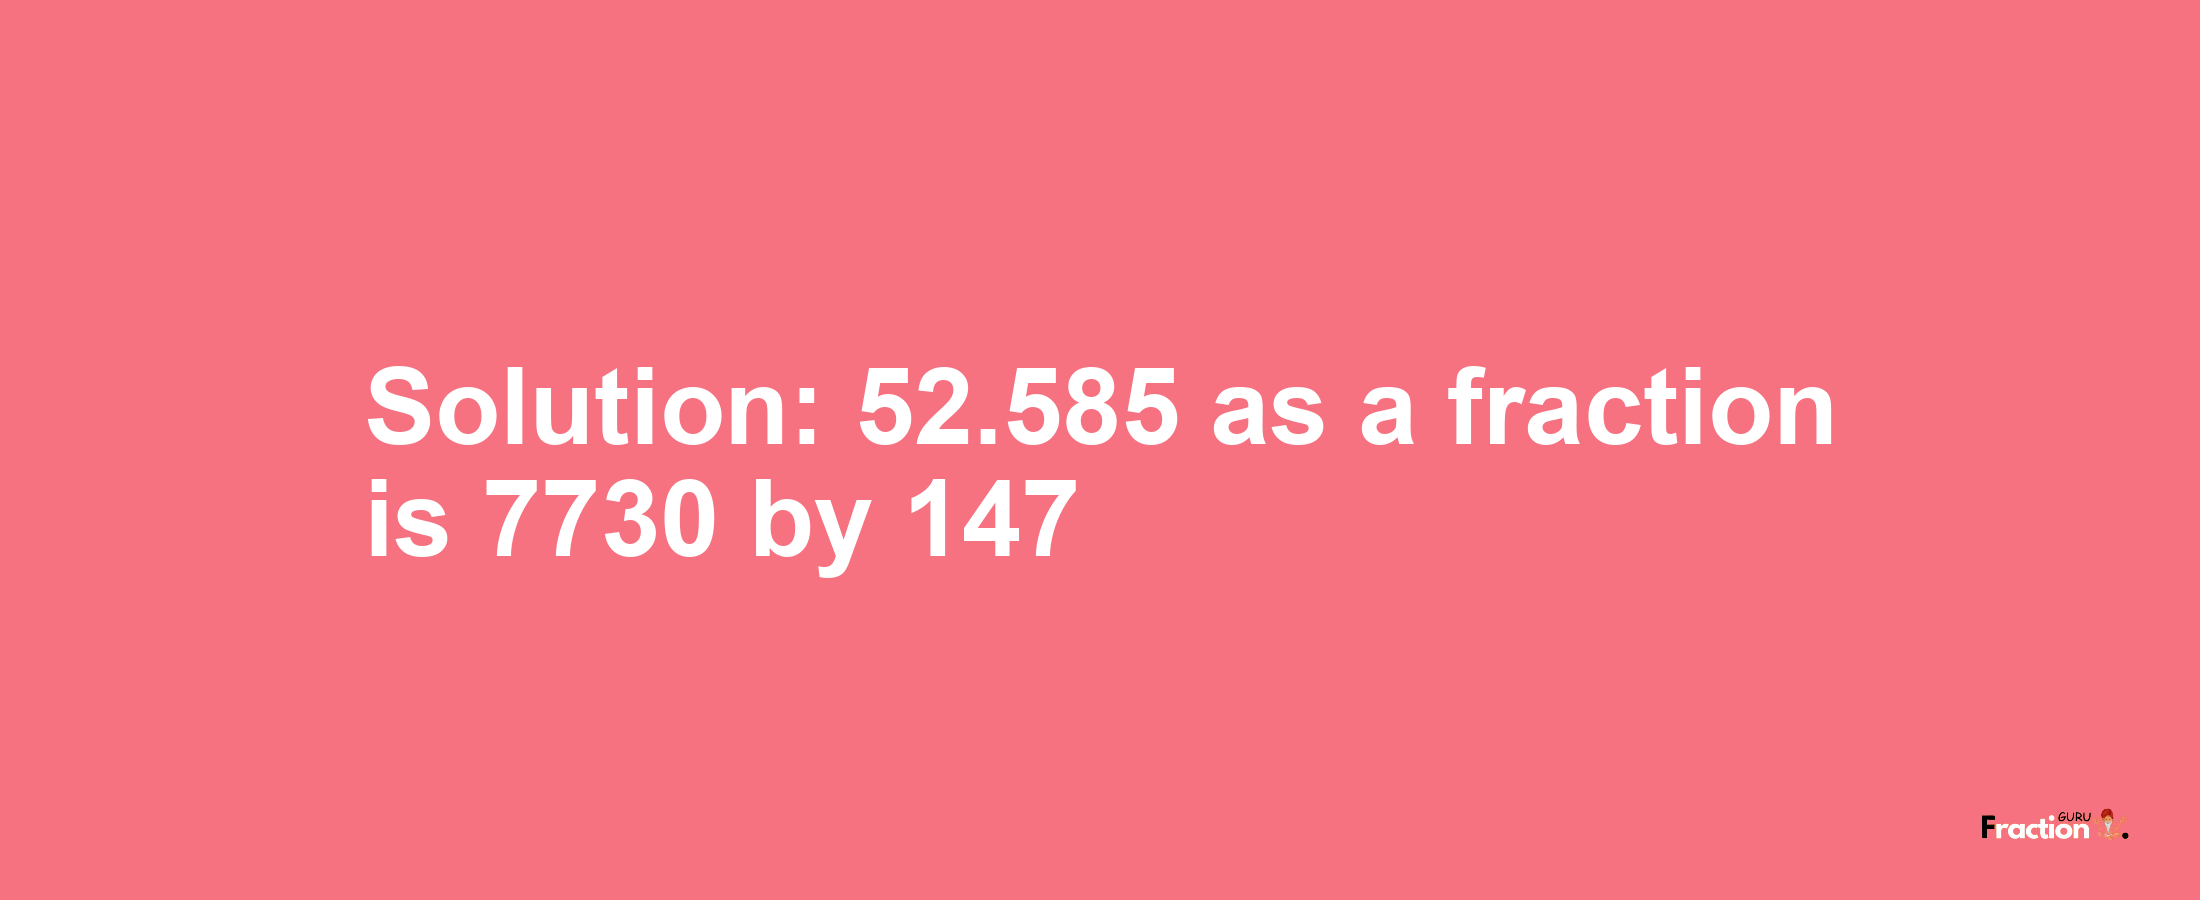 Solution:52.585 as a fraction is 7730/147